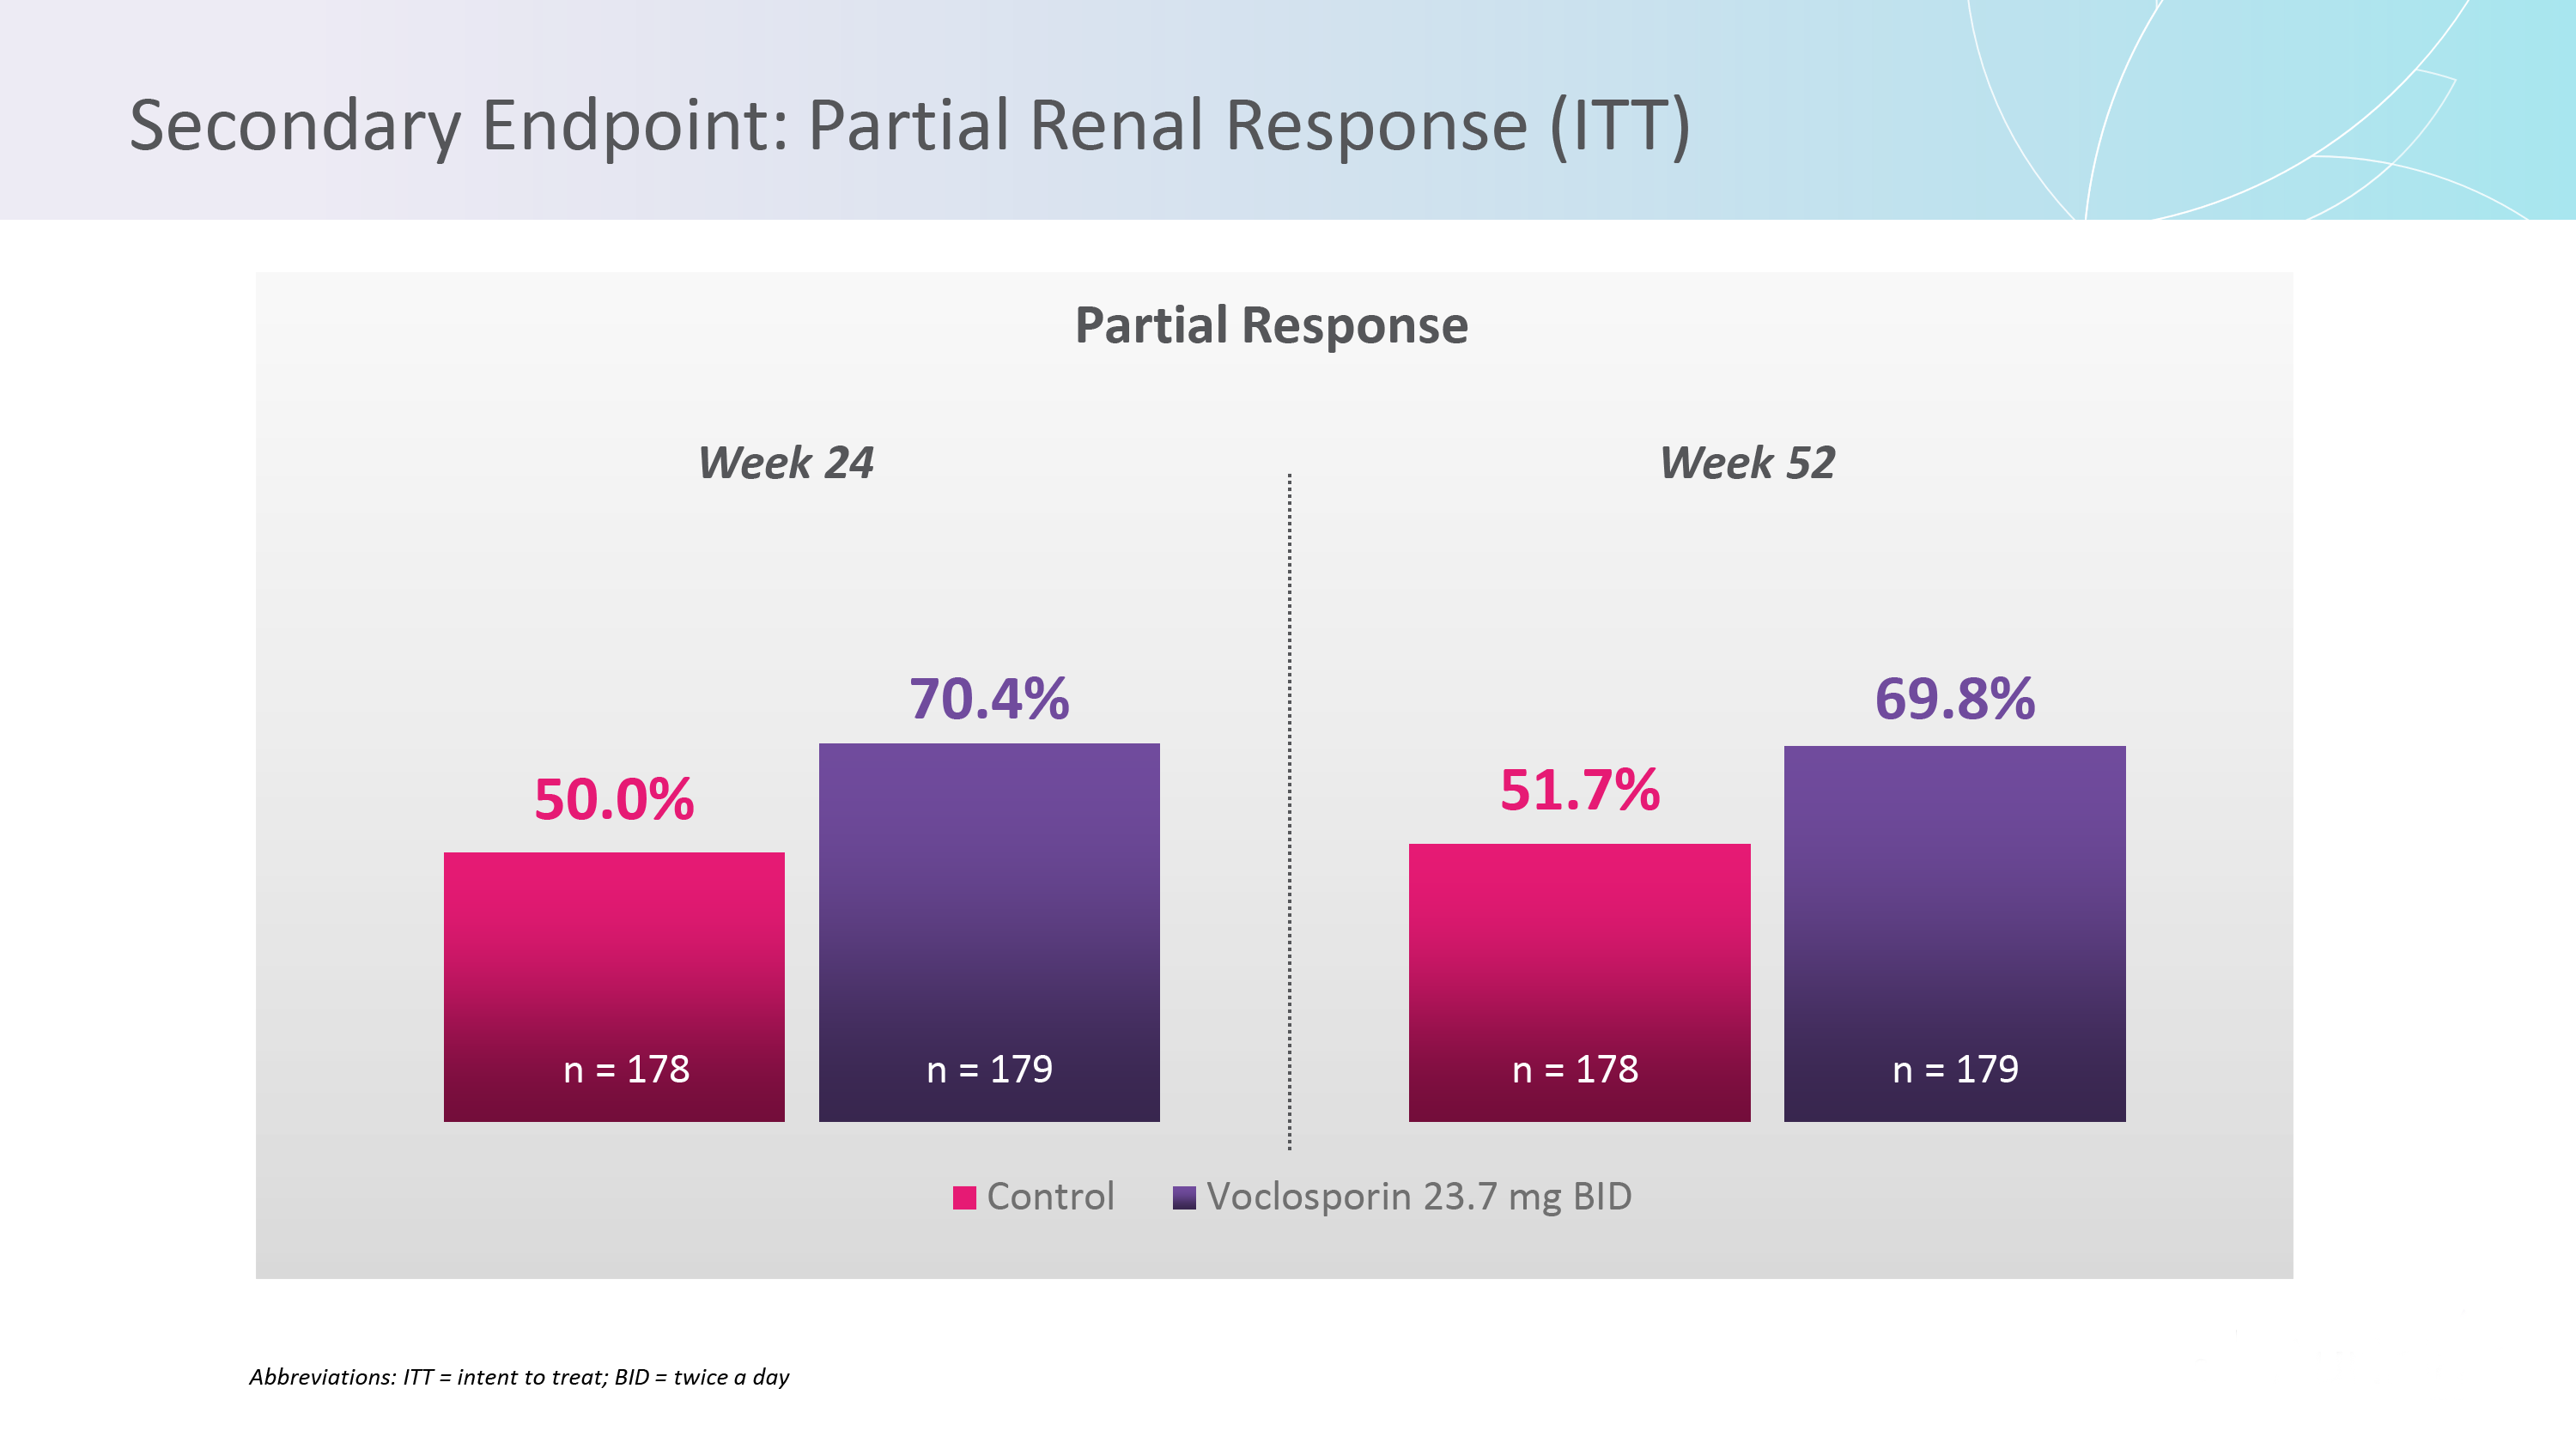 AURORA Phase 3 Clinical Trial Secondary Endpoint Partial Renal Response